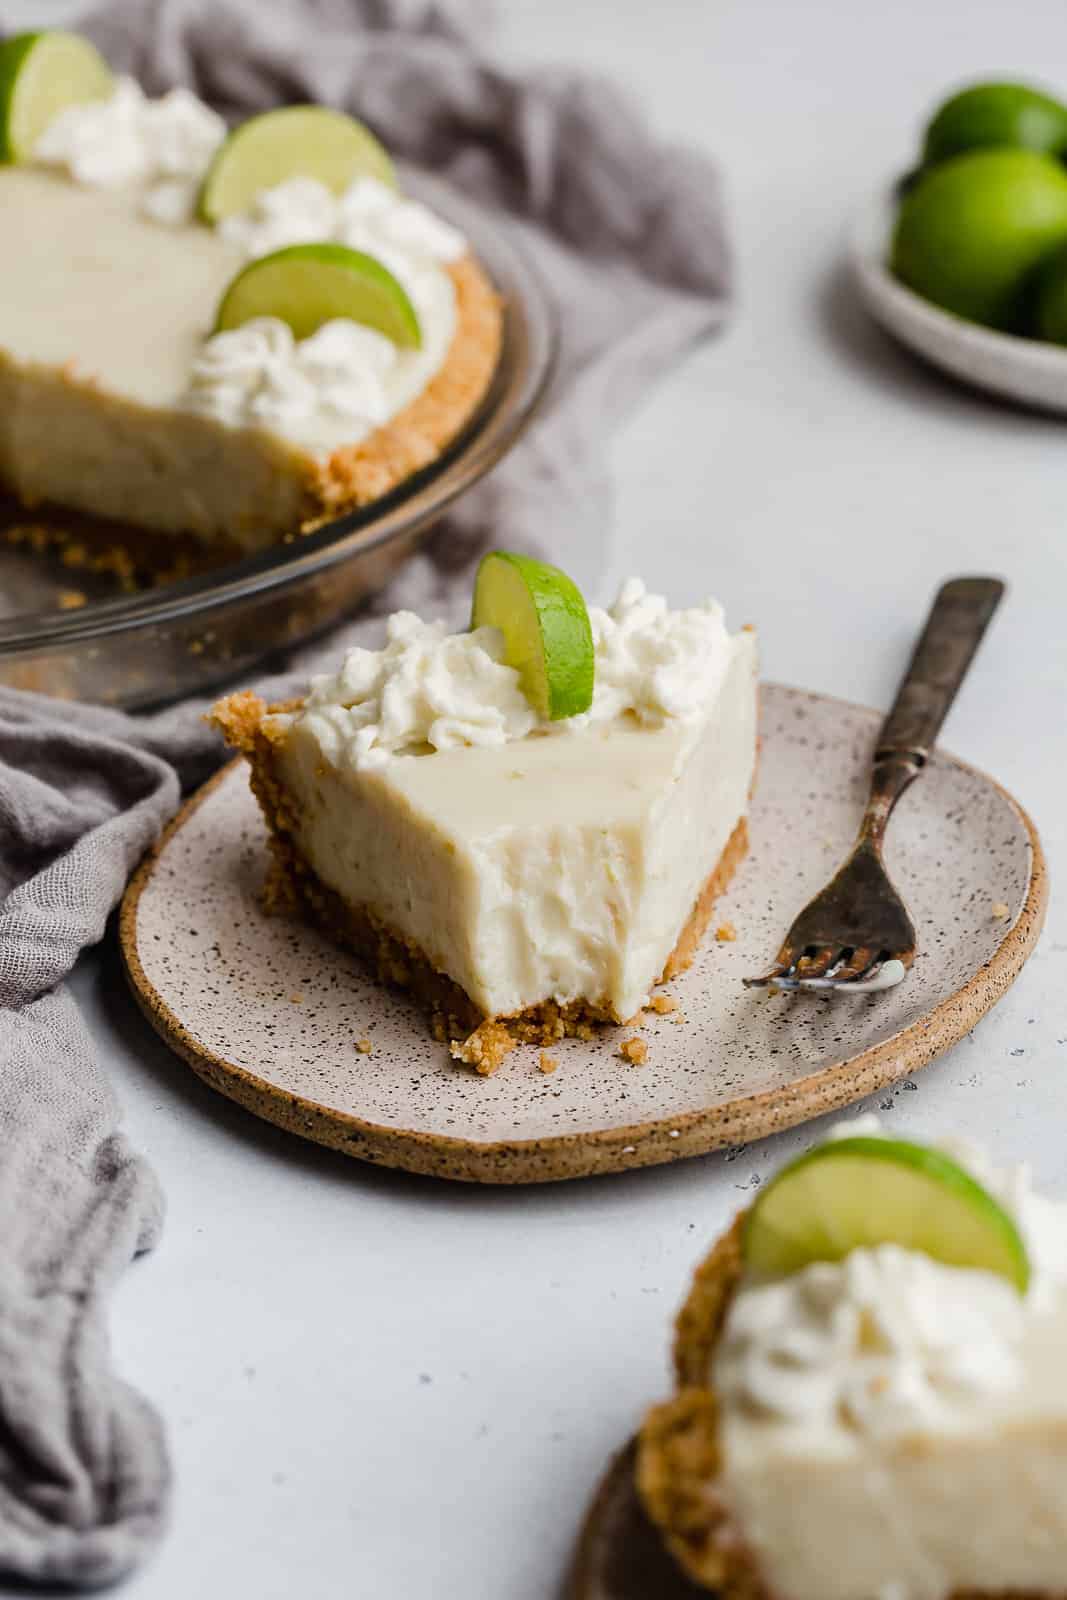 A slice of key lime pie on a plate, with a fork resting beside it.